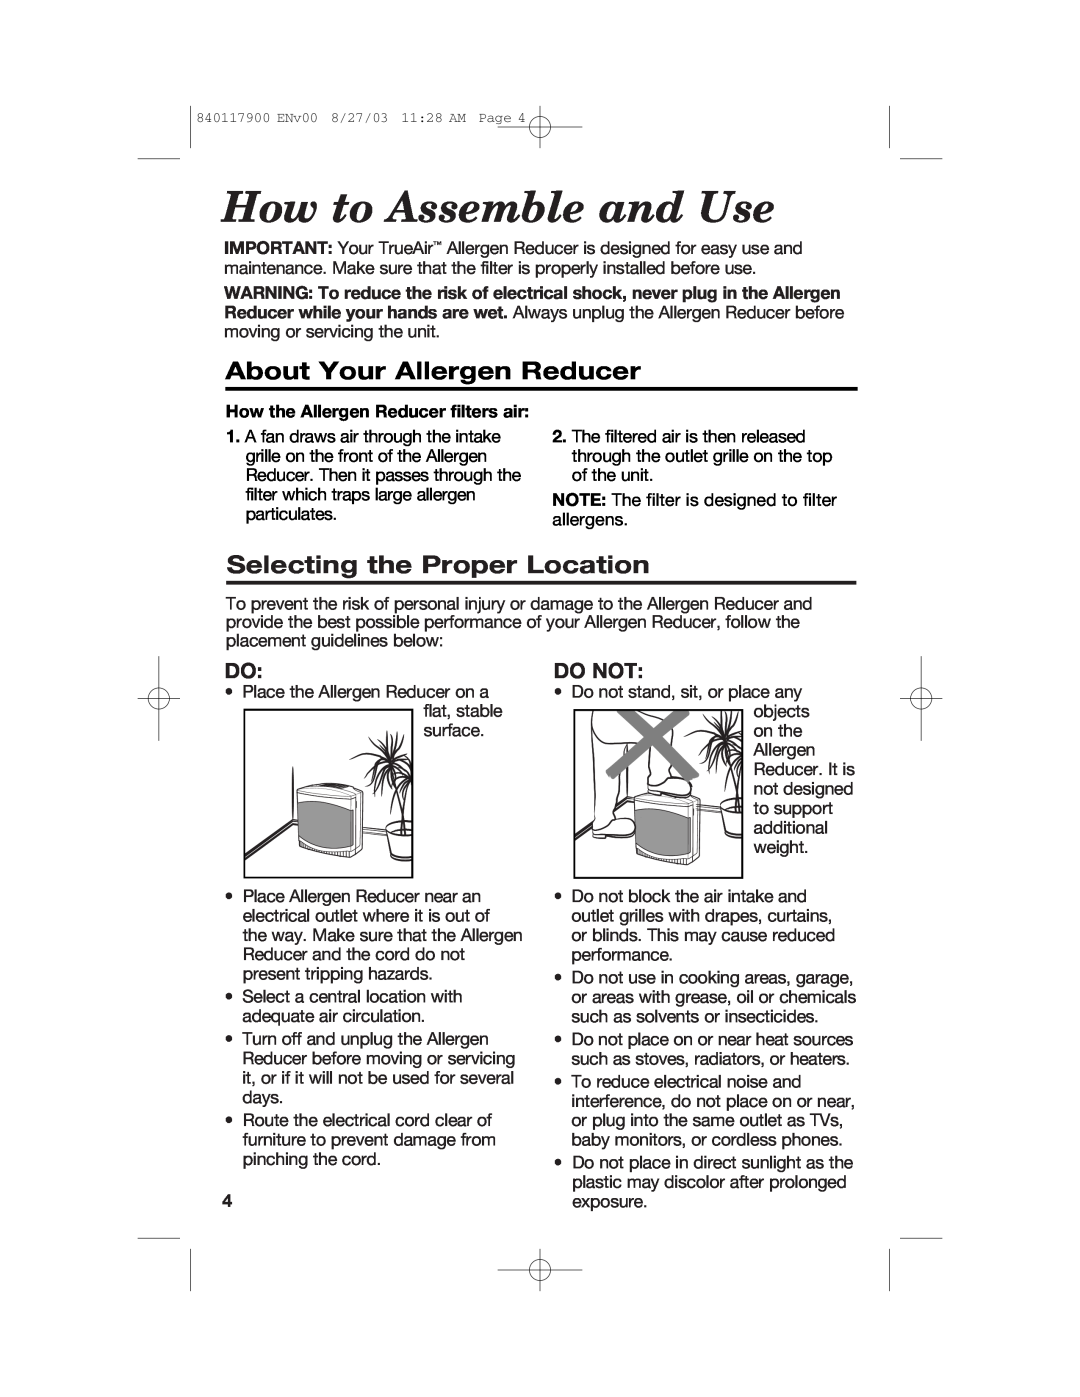 Hamilton Beach 840117900 manual How to Assemble and Use, About Your Allergen Reducer, Selecting the Proper Location, Do Not 